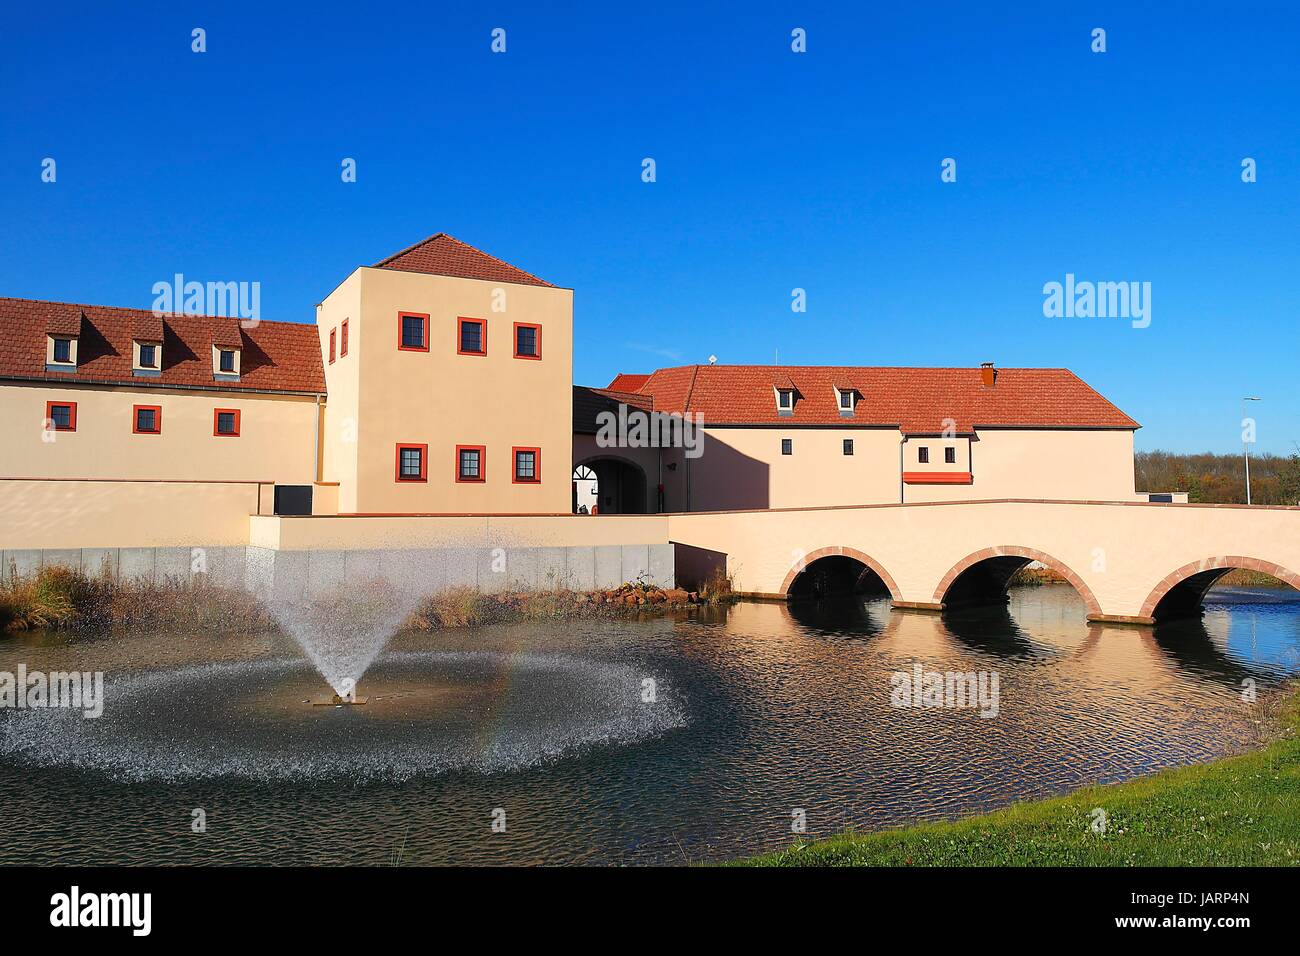 Fabrikverkauf High Resolution Stock Photography and Images - Alamy